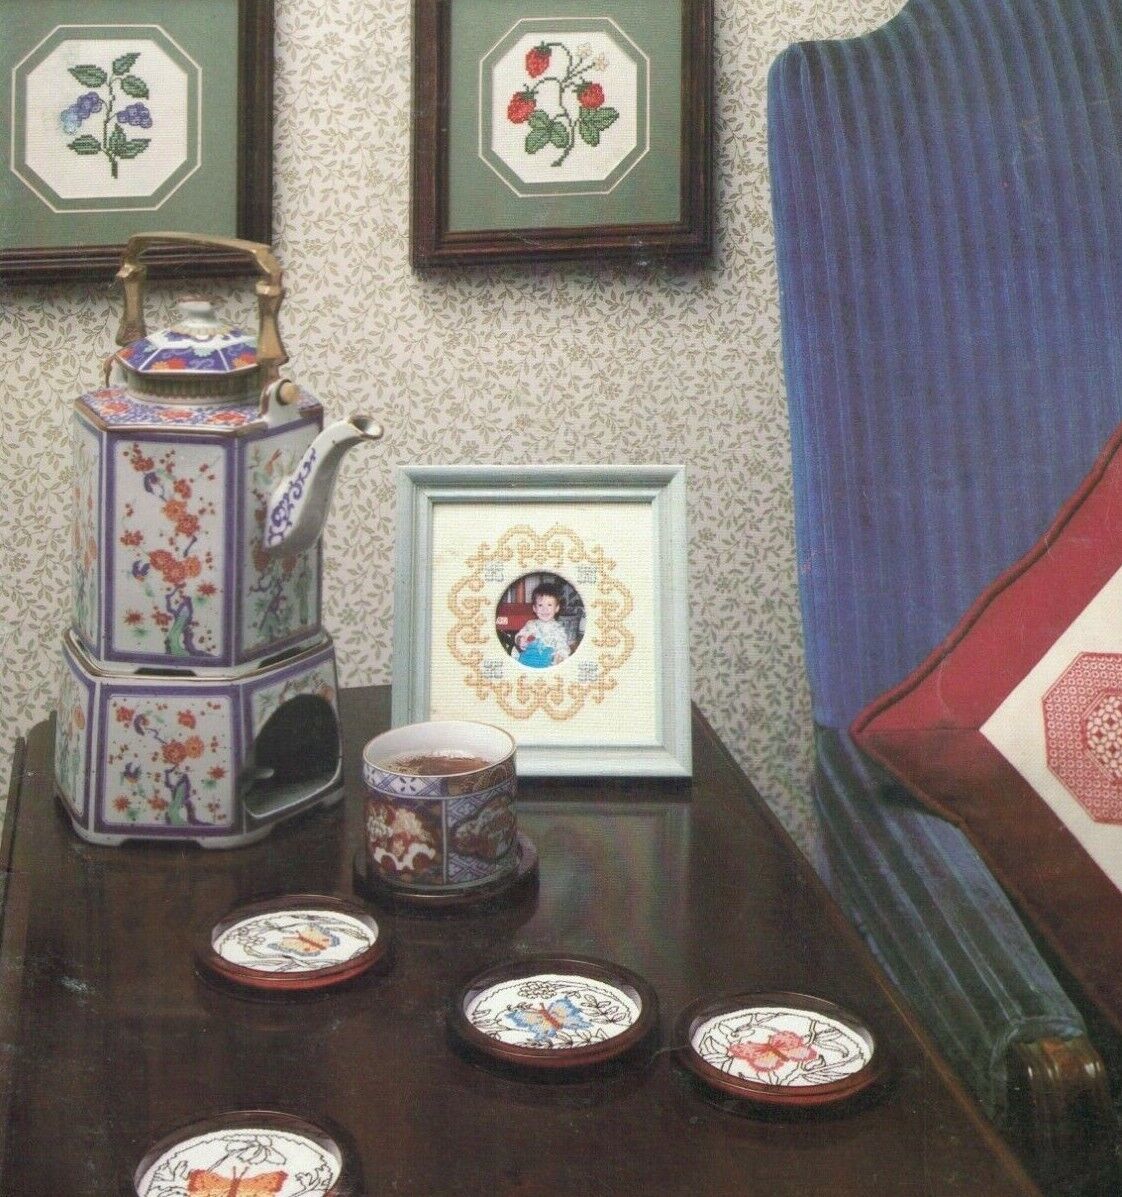 Primary image for Coasters, Etc. Serendipity Designs Carolyn Meacham 1981 Butterfly Hearts Glasses